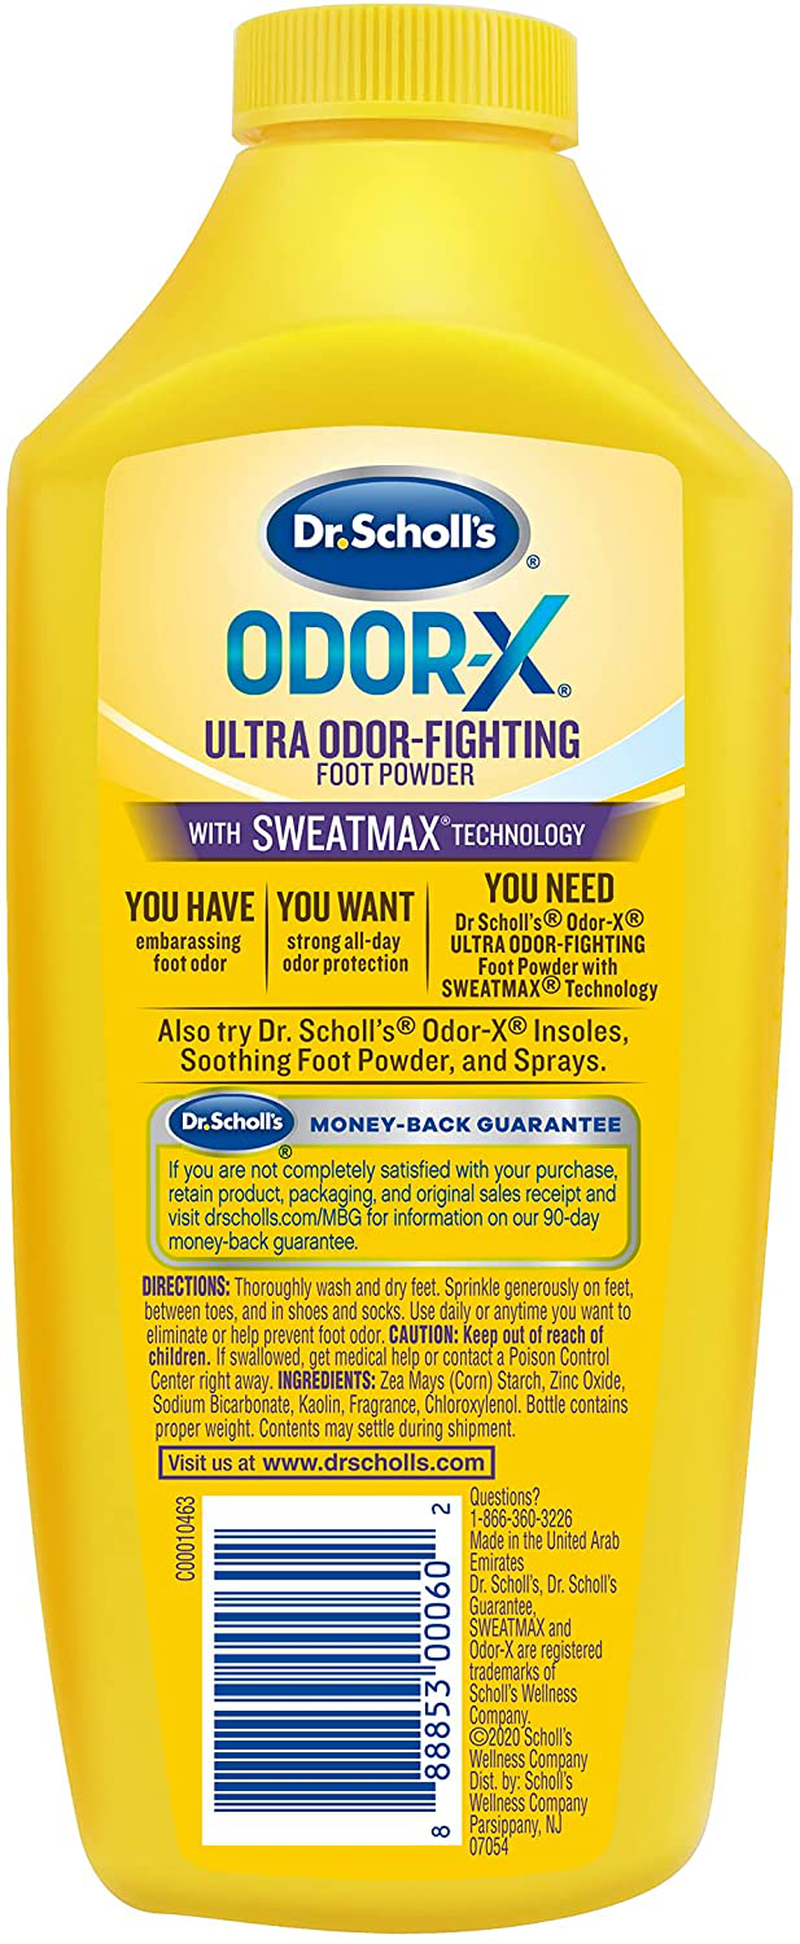 Dr. Scholl'S Odor-Fighting X Foot Powder, Yellow, 6.25 Ounce (Pack of 3)